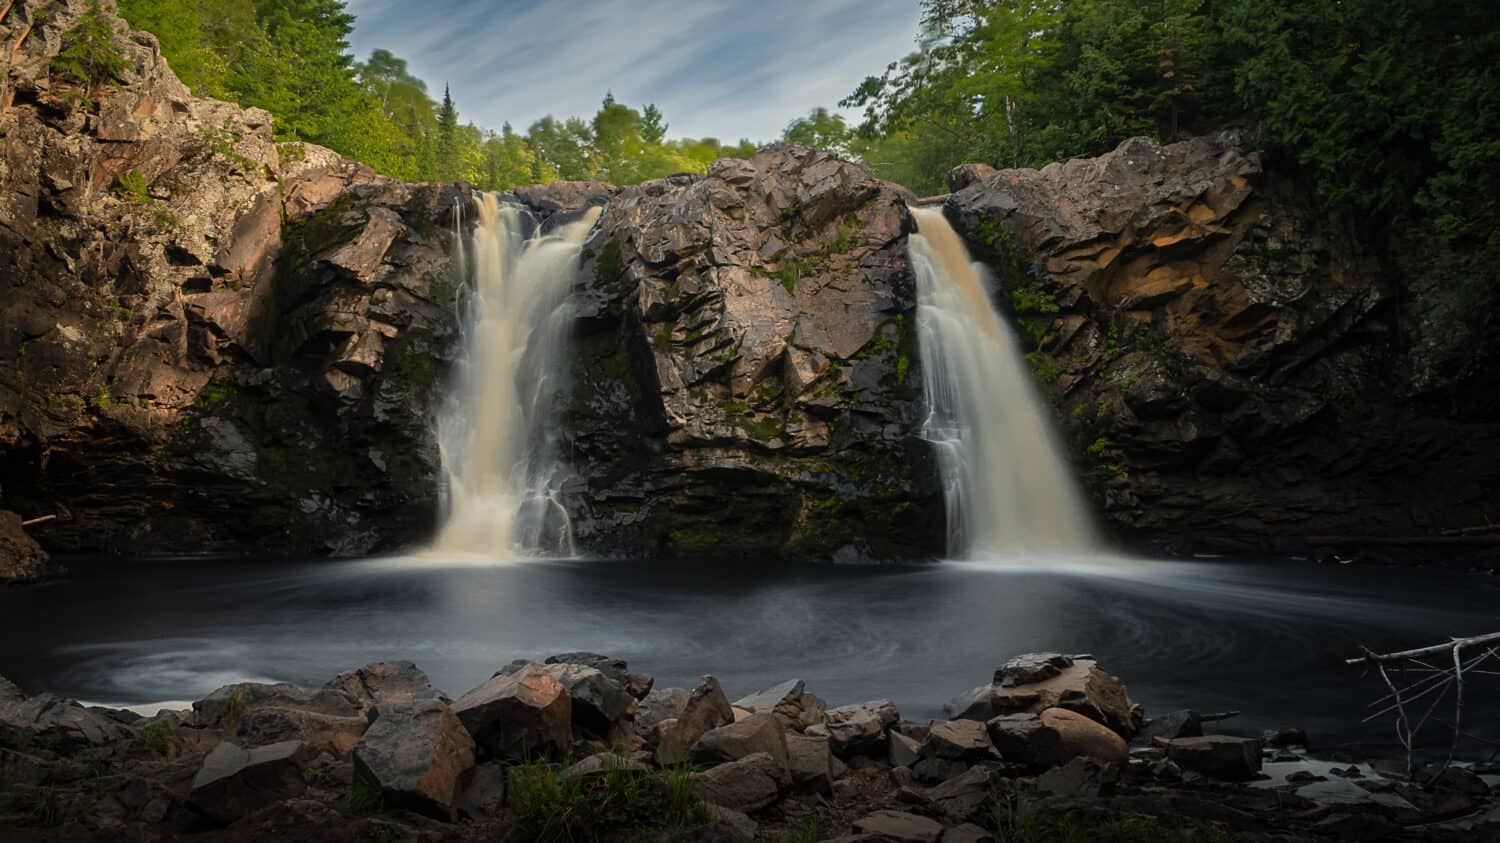 Photo of the lower falls at Pattison state park.